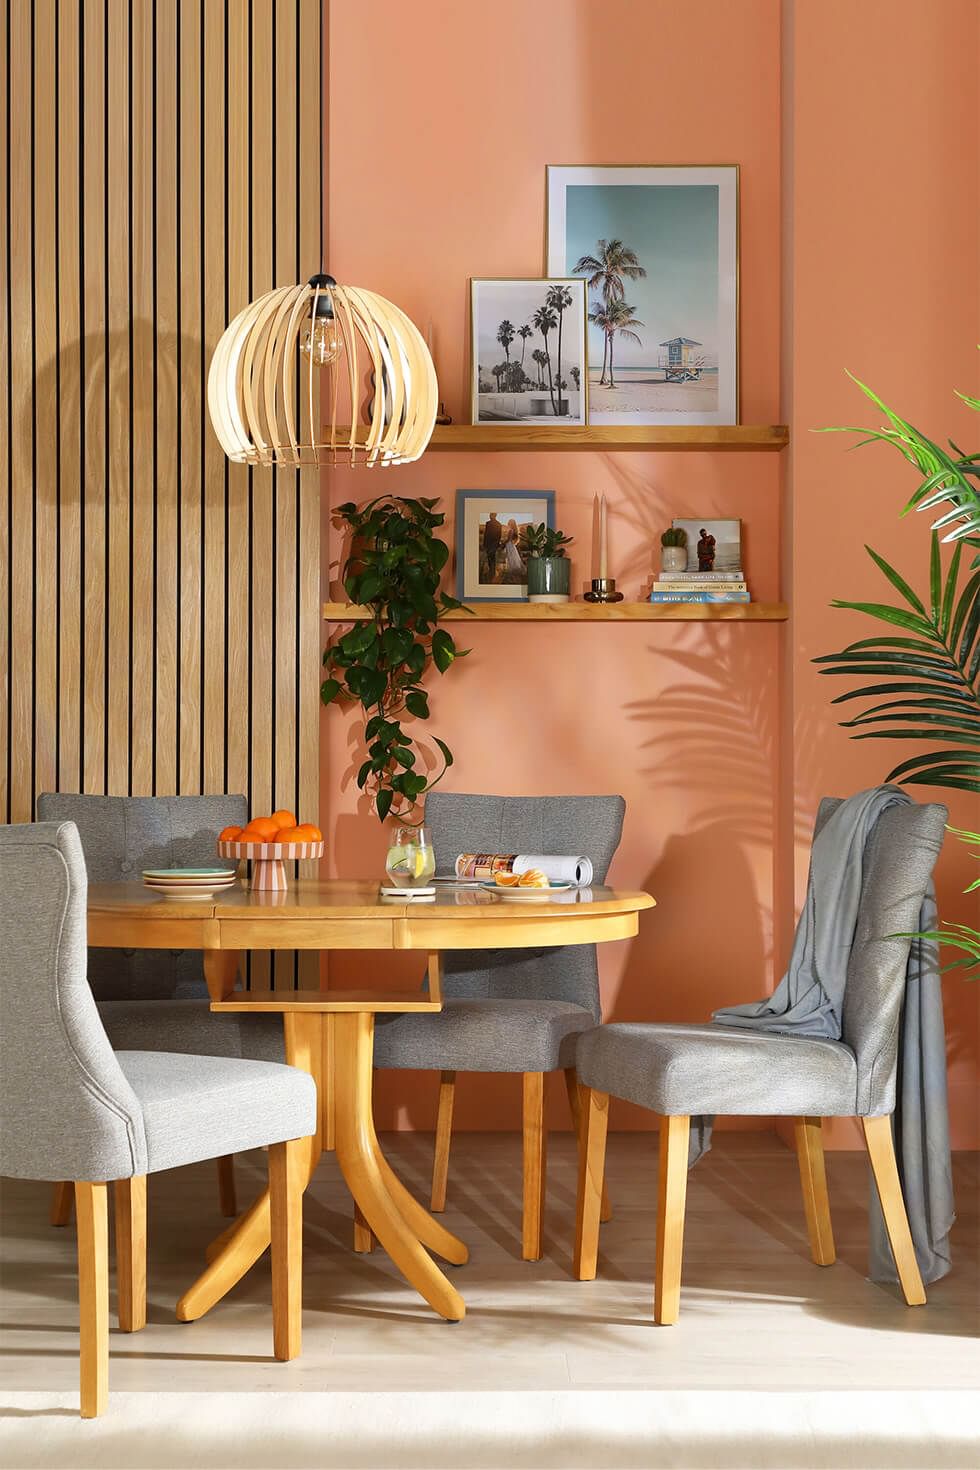 Tropicandi dining room with lots of natural textures